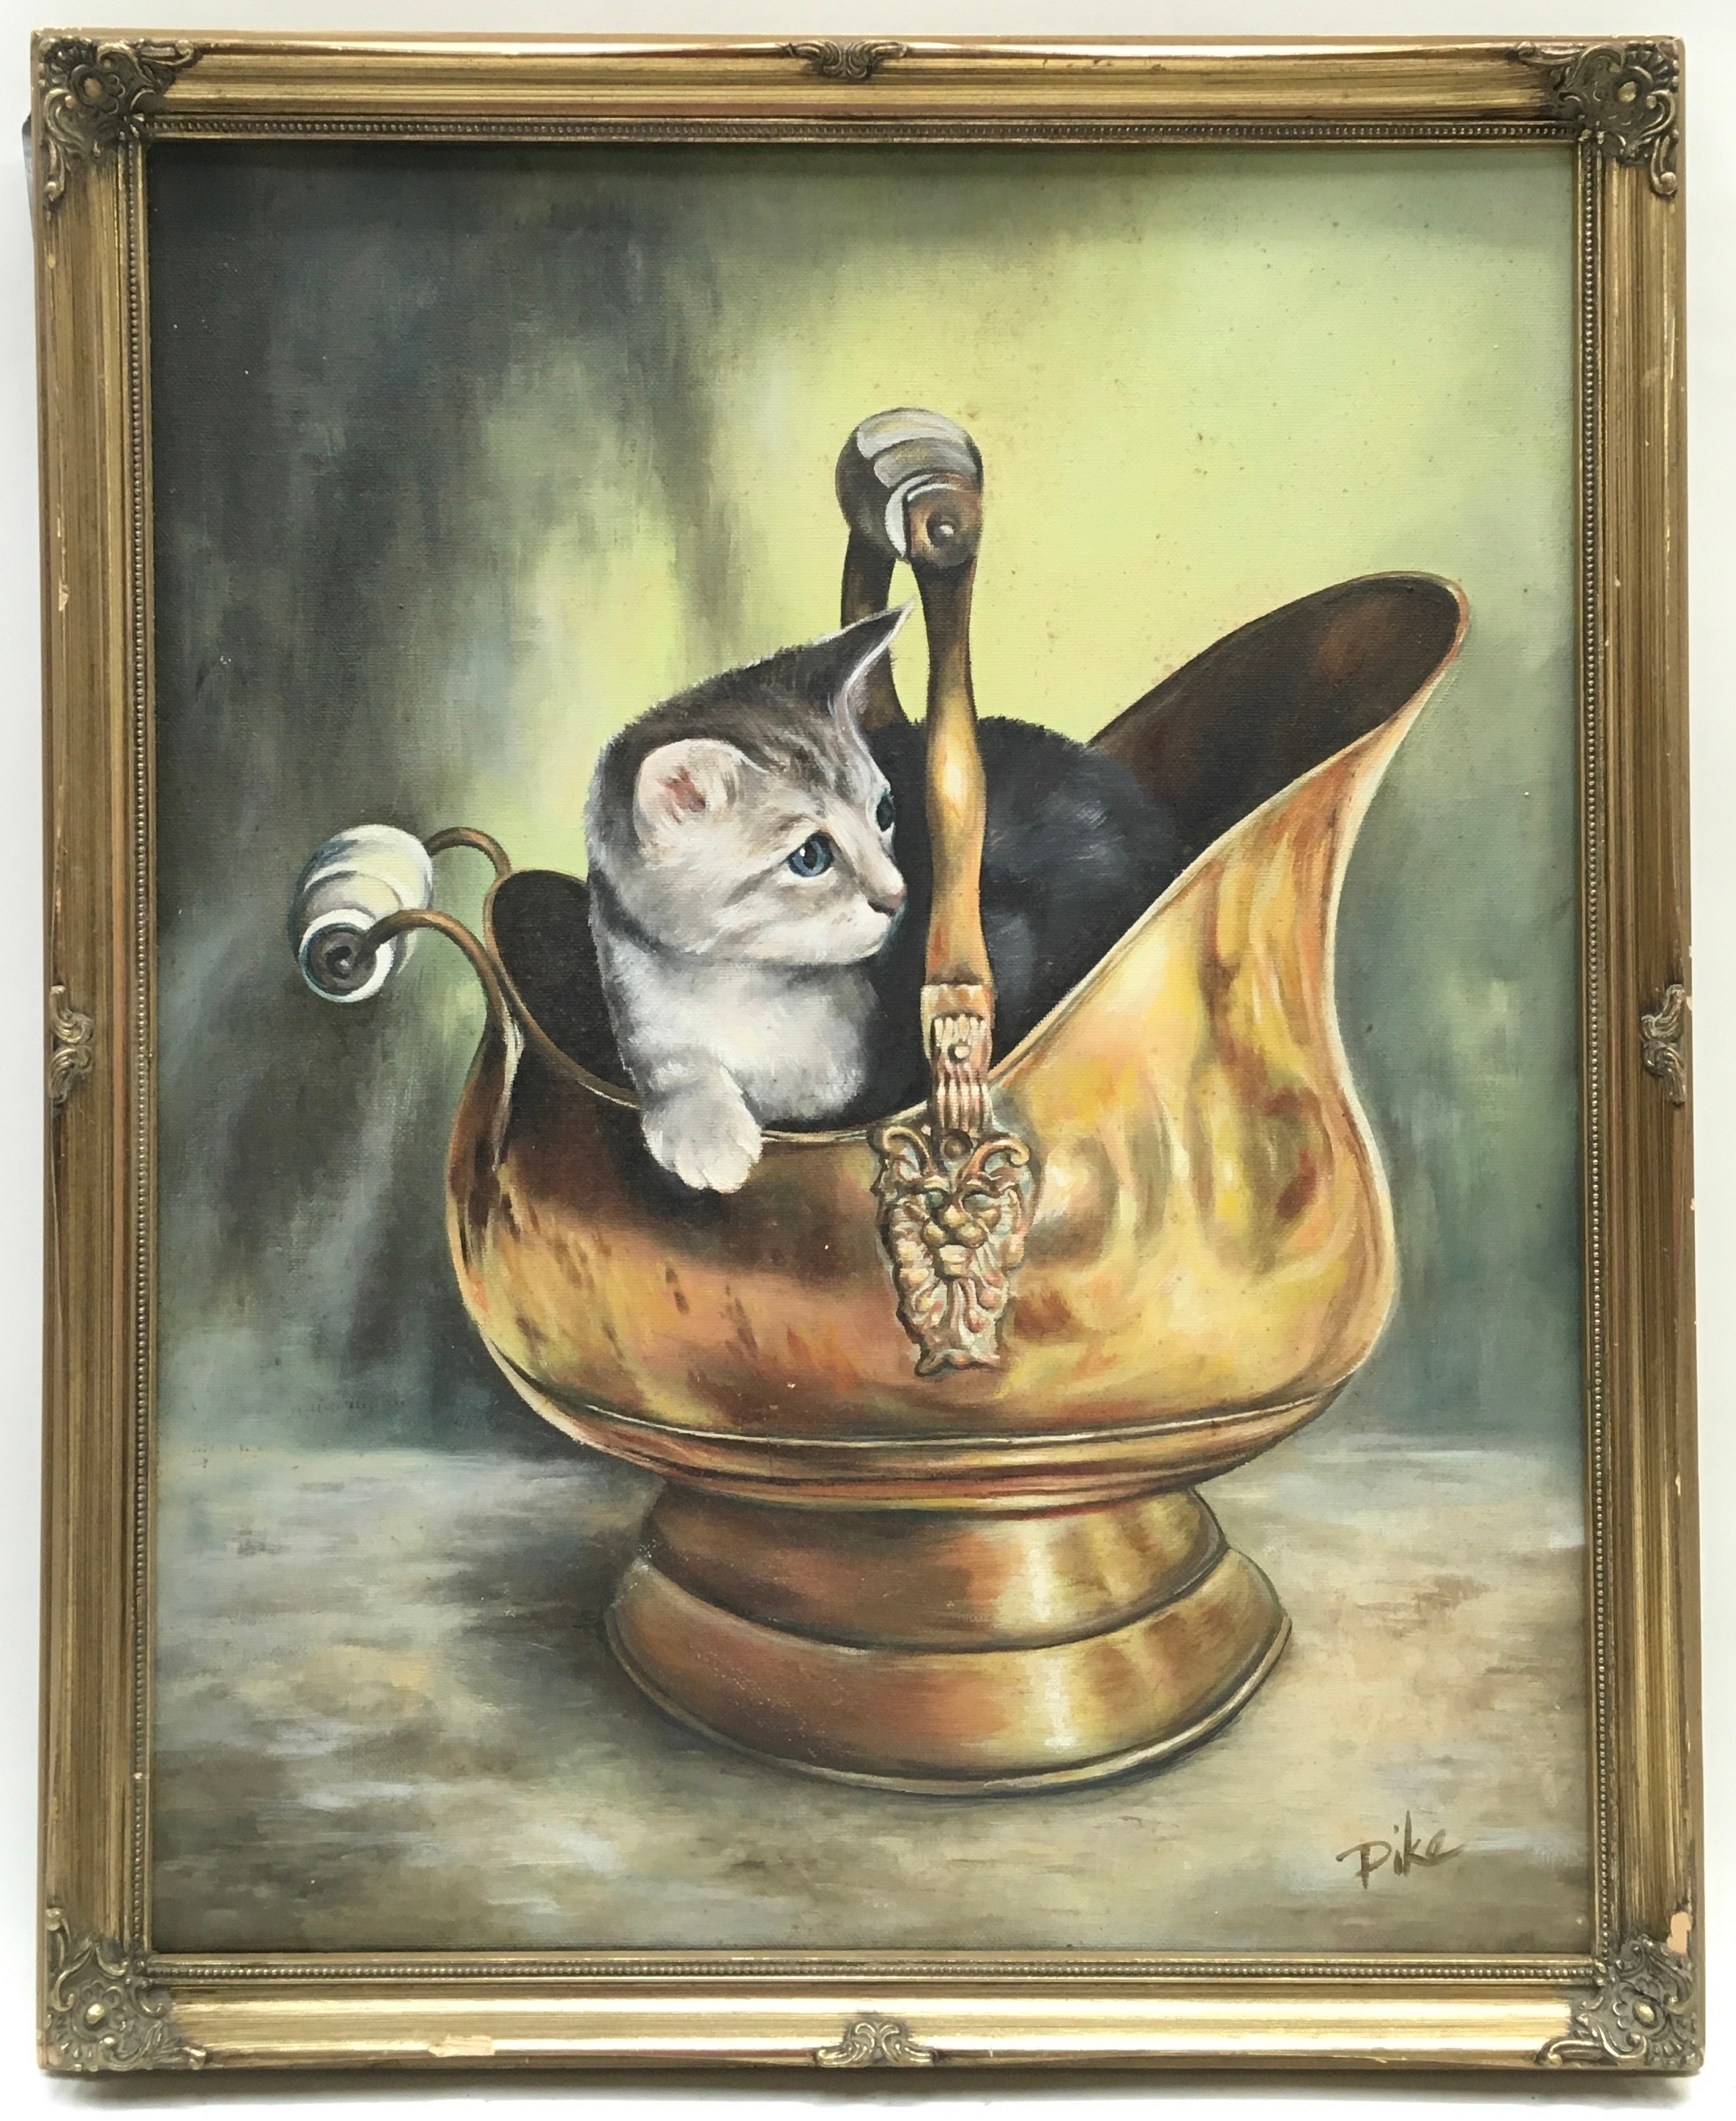 Gilt framed oil on canvas painting of a kitten in a coal scuttle signed "Pike" 46x56cm.